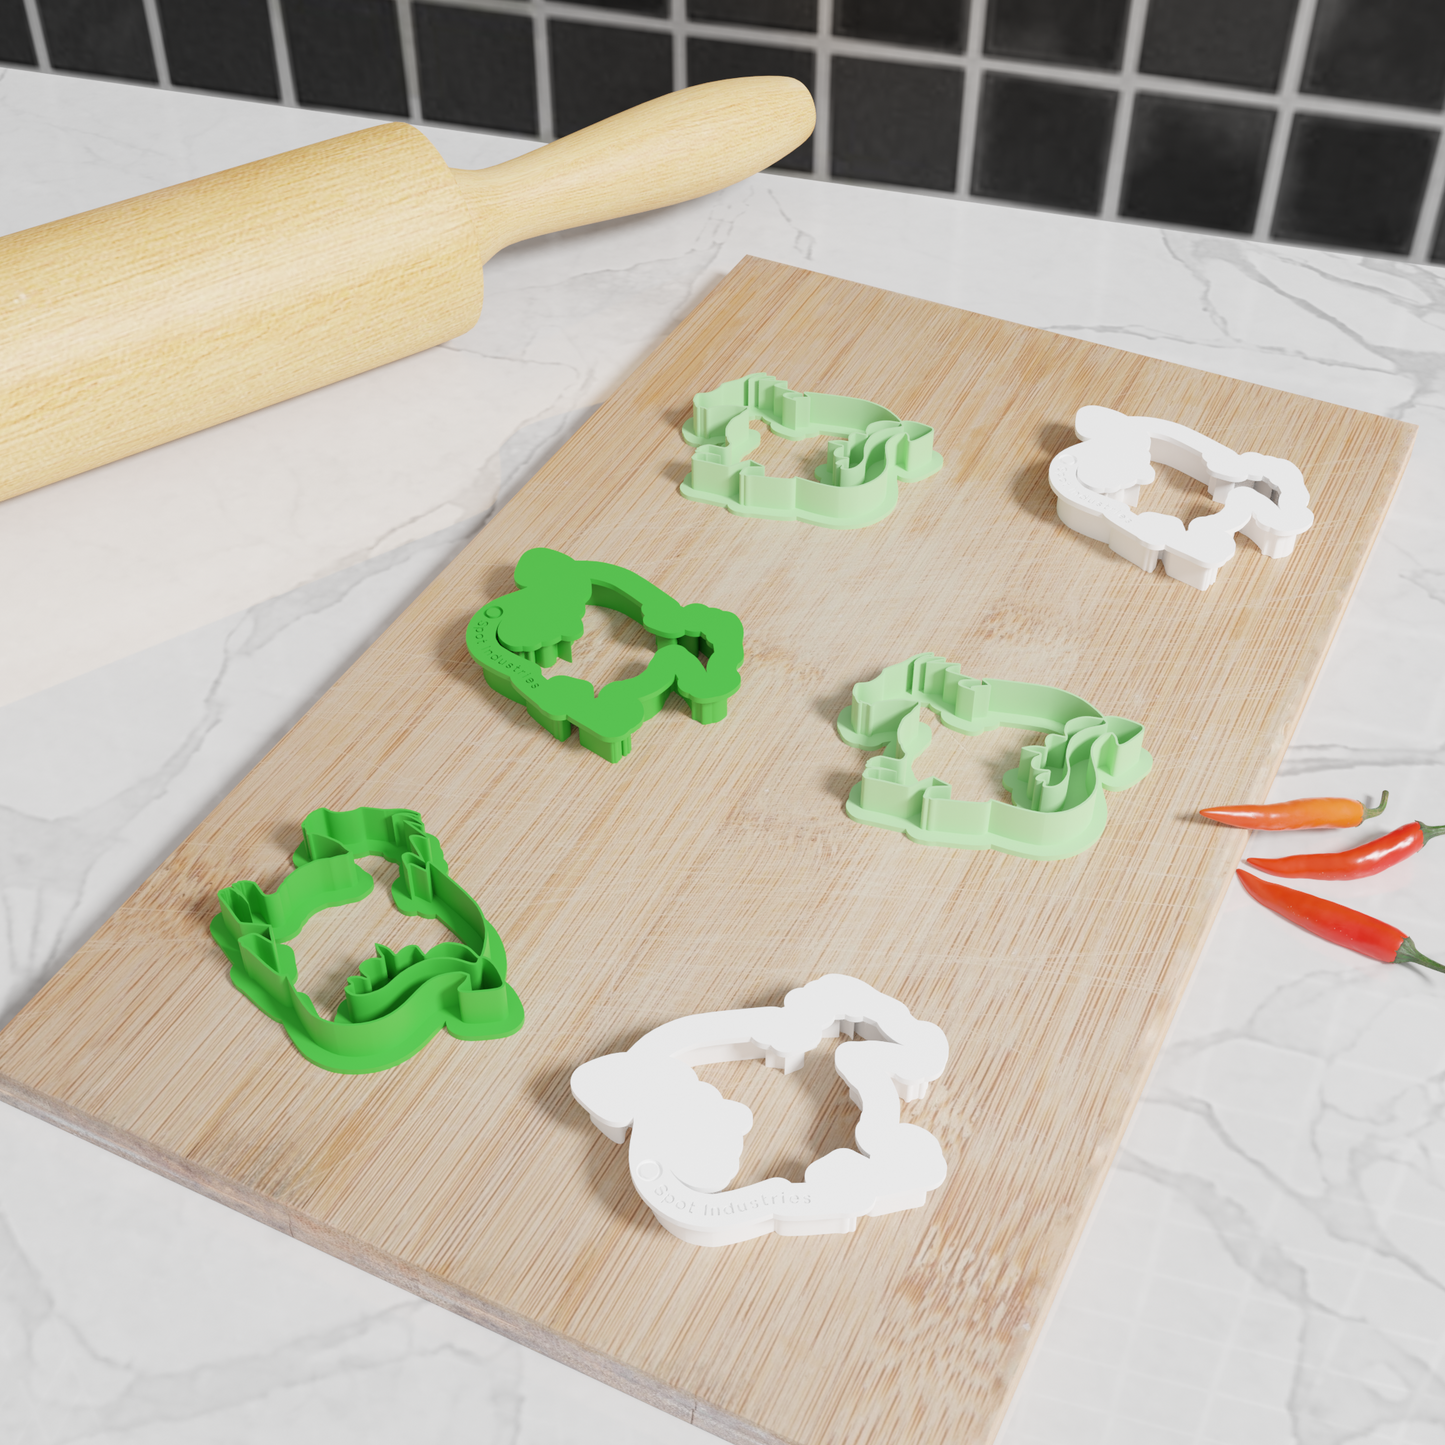 Baby Dragon Cookie Cutter Set. 4 Sizes Tons Of Colors. Baby Dragon Cookie Cutter Matches Our Other Dinos!